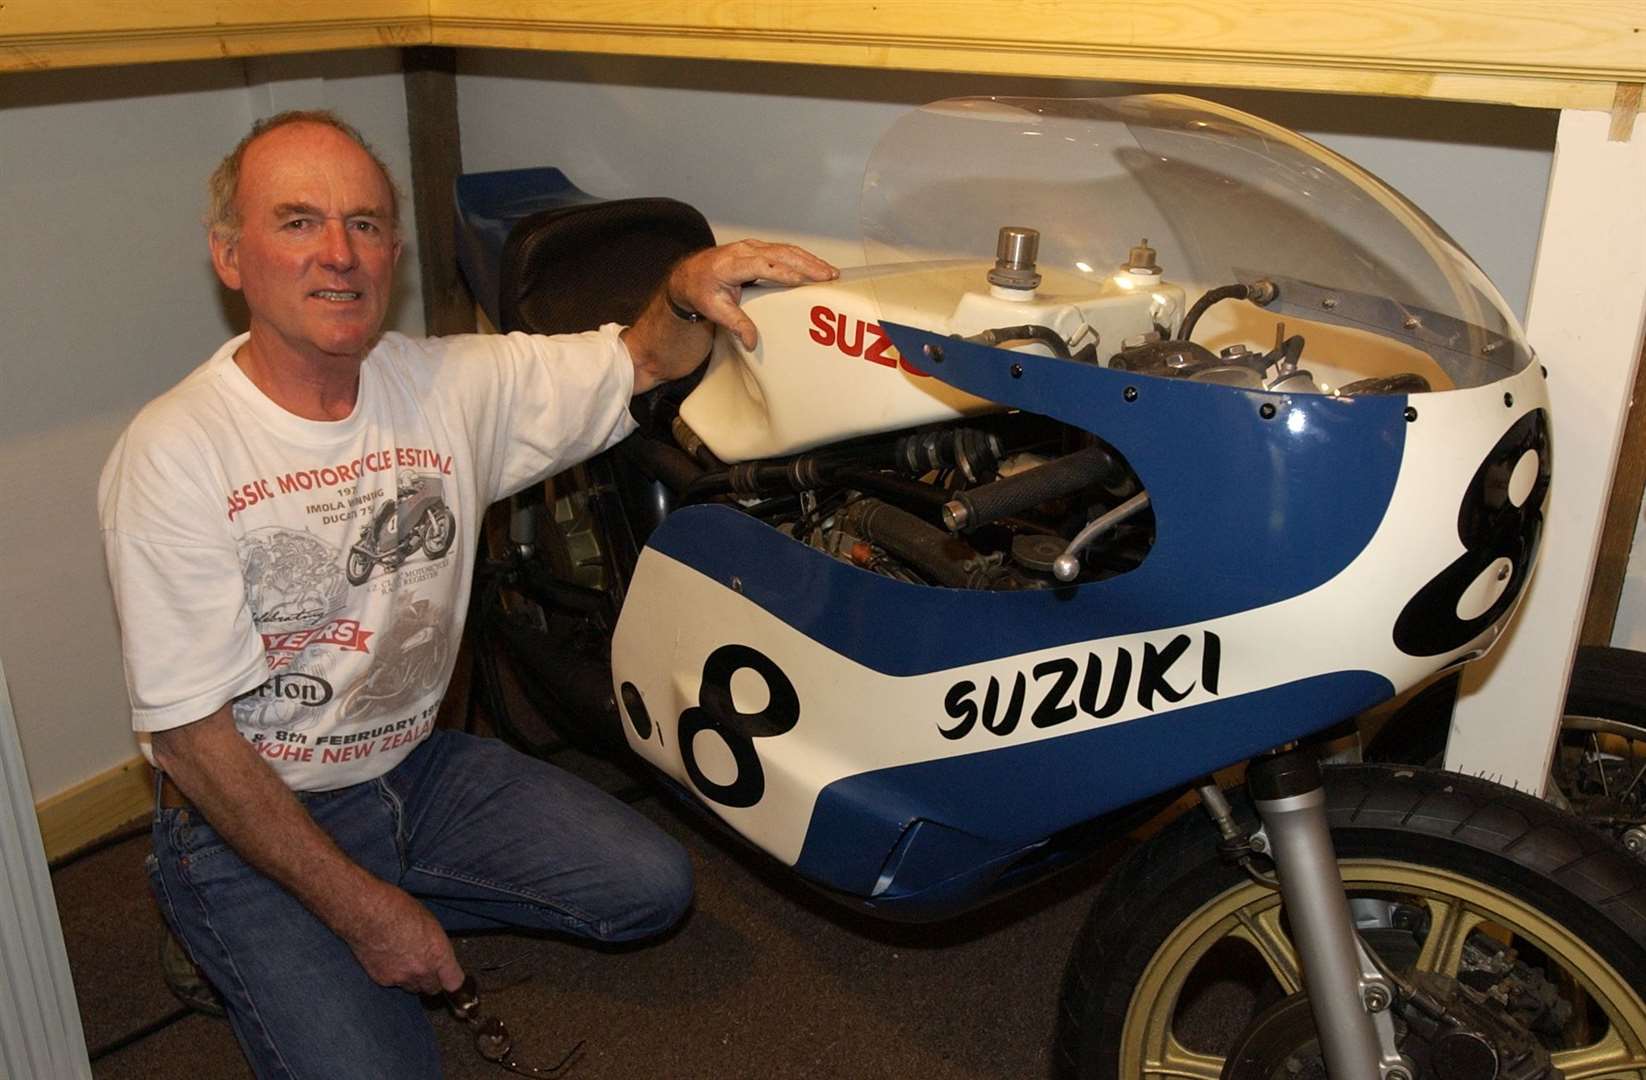 Former motorcycle racer Paul Smart with one of his old race bikes